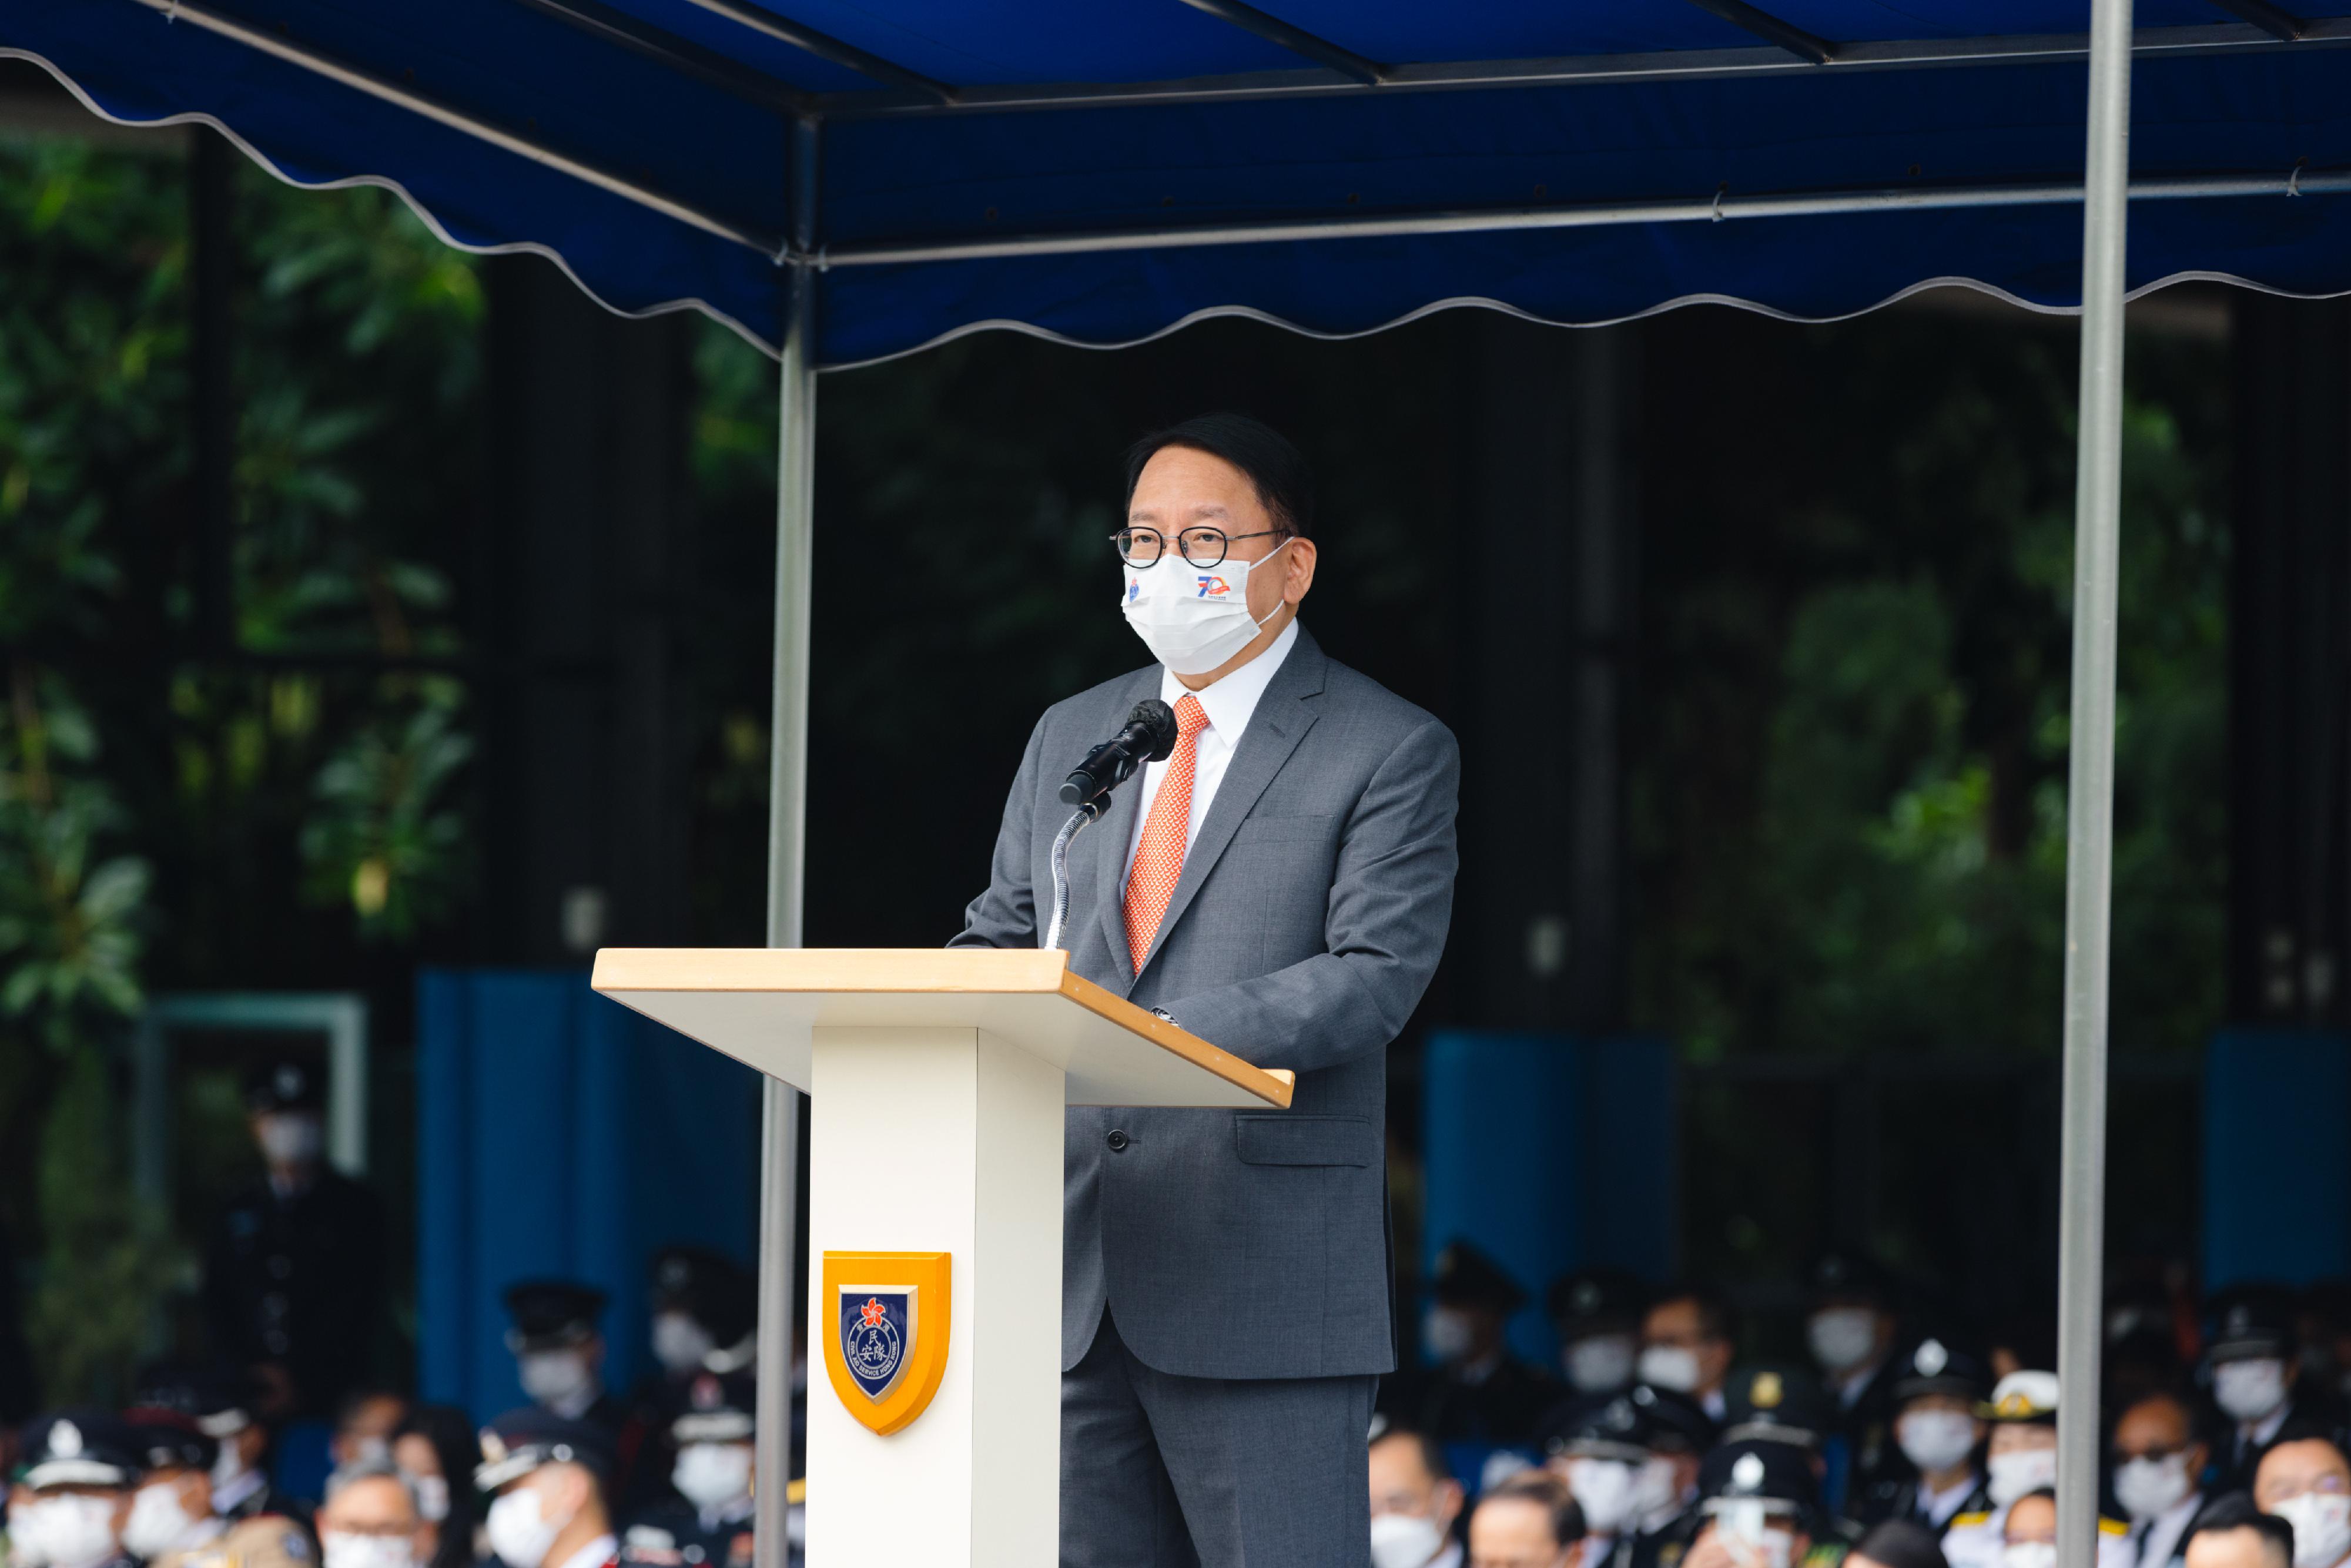 The Civil Aid Service (CAS) held the "Celebration of the 25th Anniversary of the Establishment of HKSAR and CAS 70th Anniversary Parade" today (November 27) at the Hong Kong Police College. Photo shows the Chief Secretary for Administration, Mr Chan Kwok-ki, delivering a speech at the Parade.